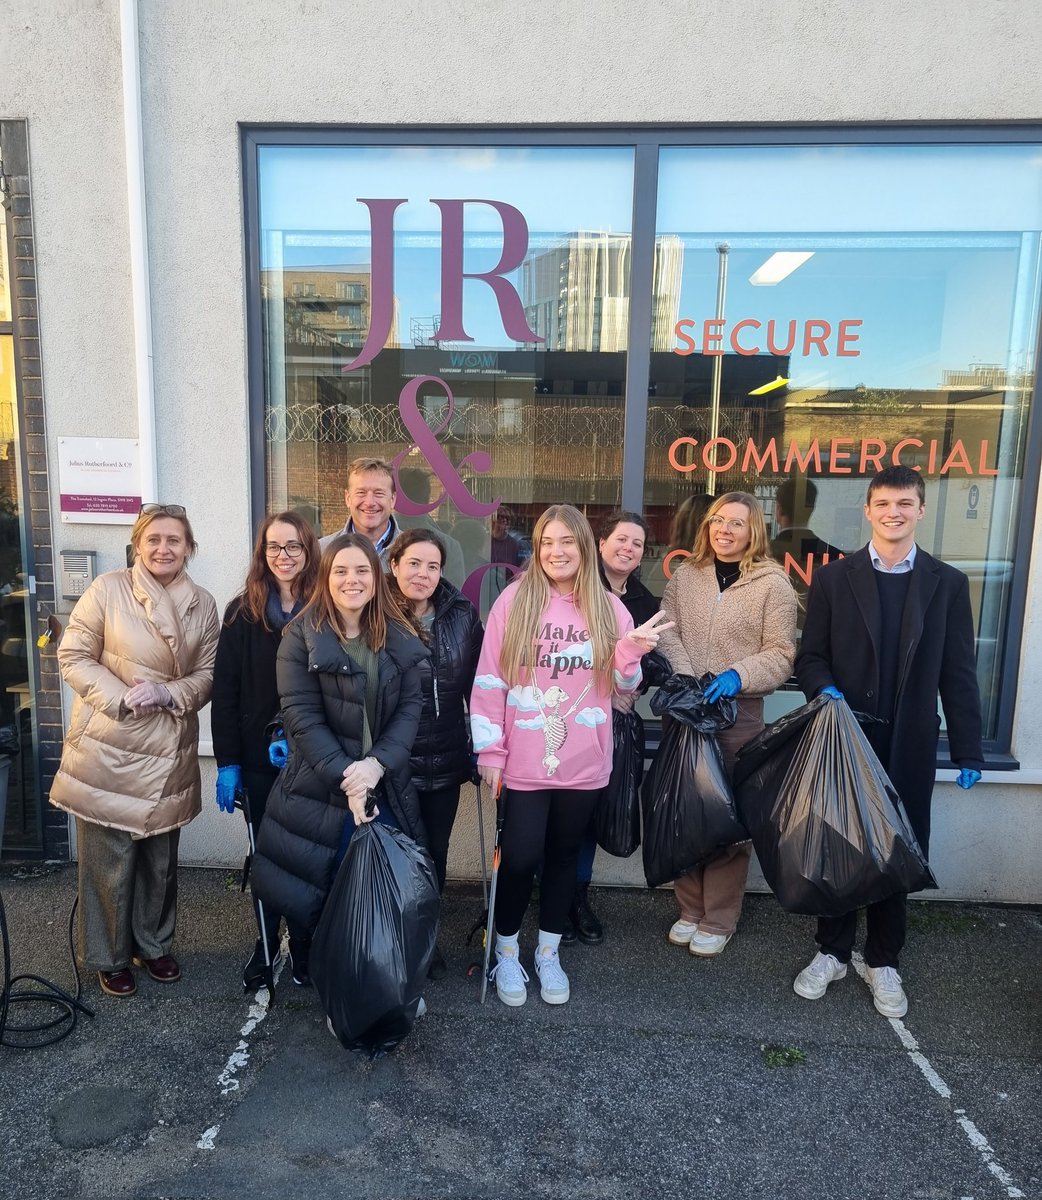 This Friday afternoon, the JR&Co team made a valiant effort to pick up litter around our head office, continuing with our 'No Litter Pledge' and placing an emphasis on sustainability. ♻️

#litterpicking #nolitterpledge #environmentallyfriendly #community #sustainability #cleaning